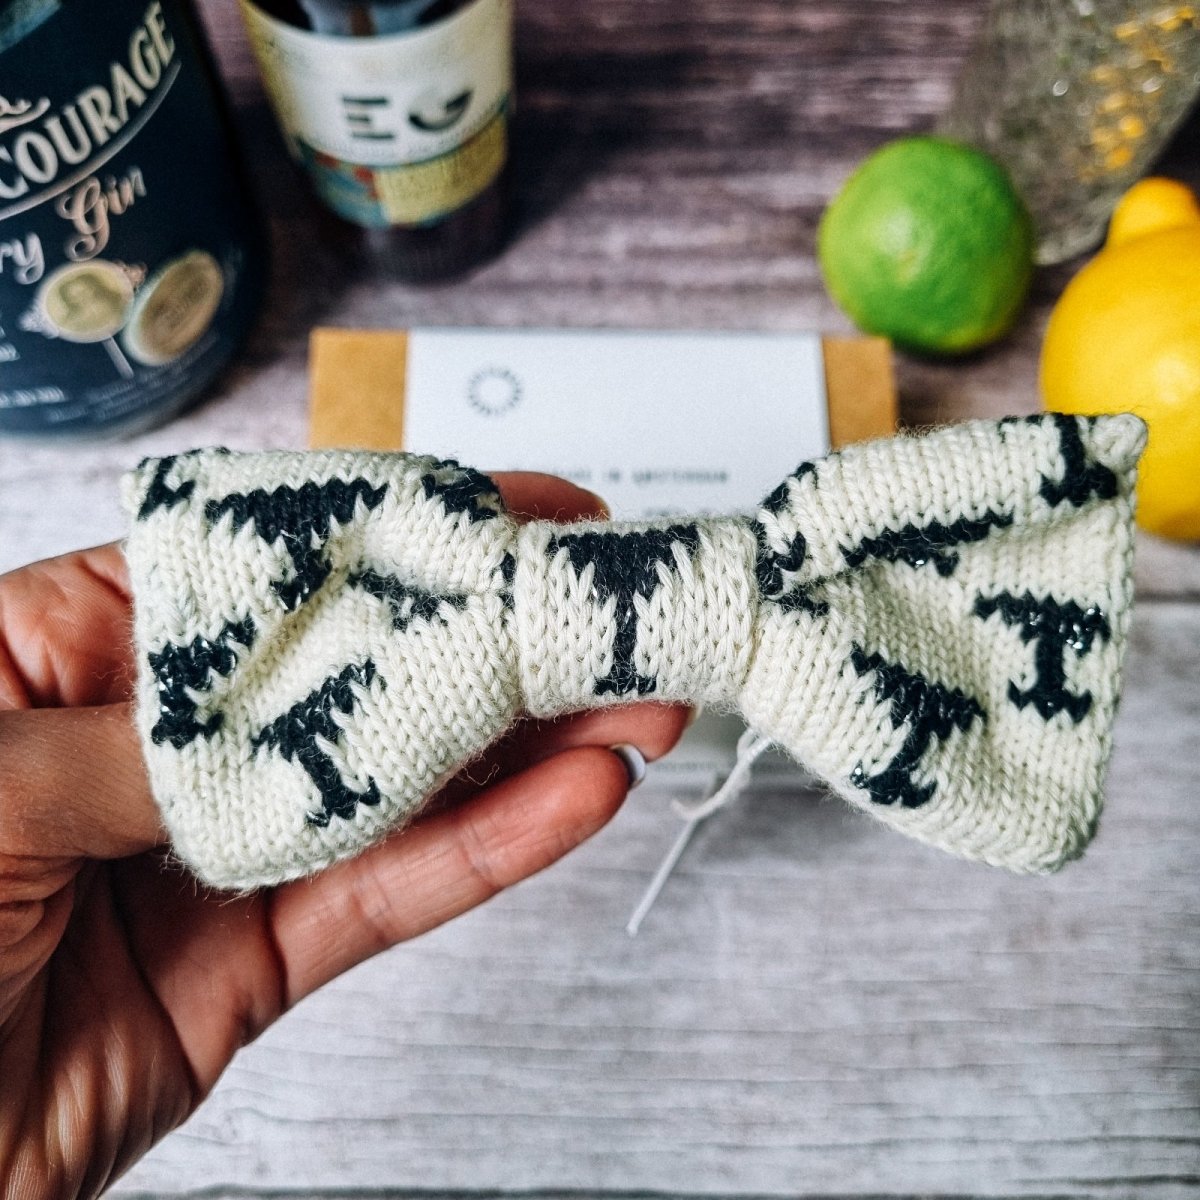 Cocktail Bow Tie - Wool & Water